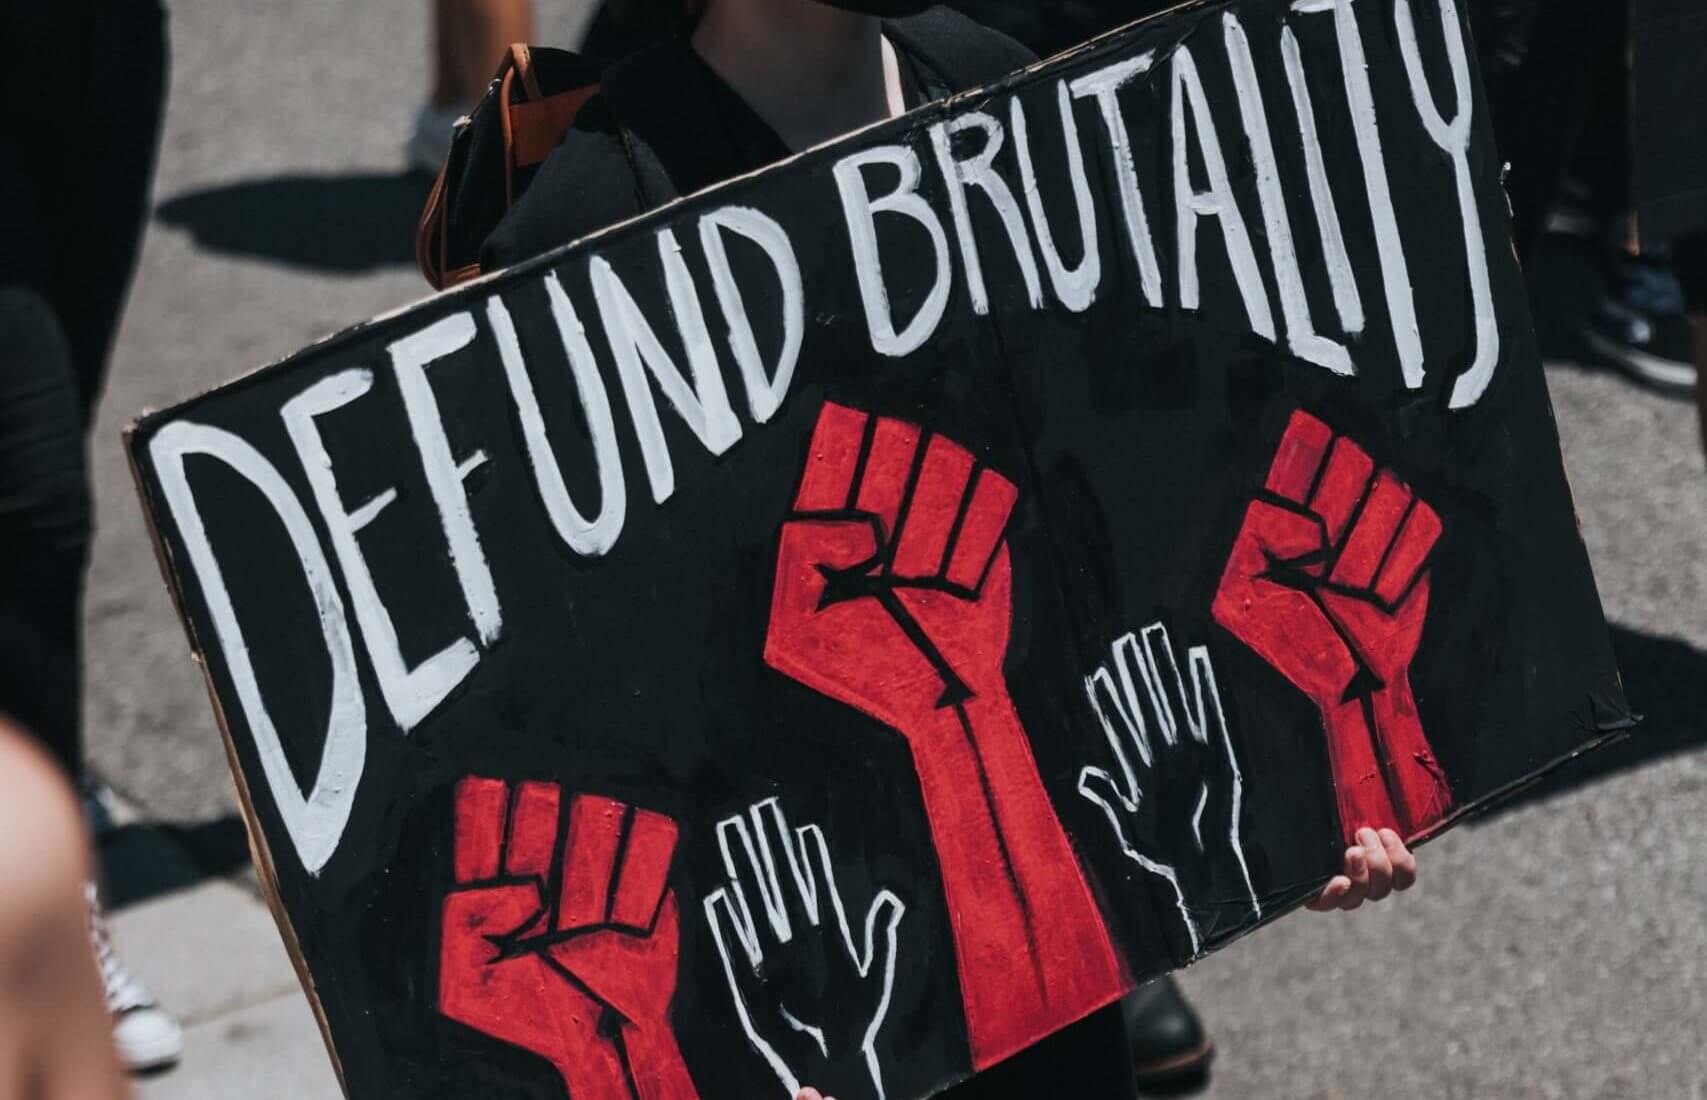 hand written sign that says, "Defund Brutality" and drawings of red fist raised